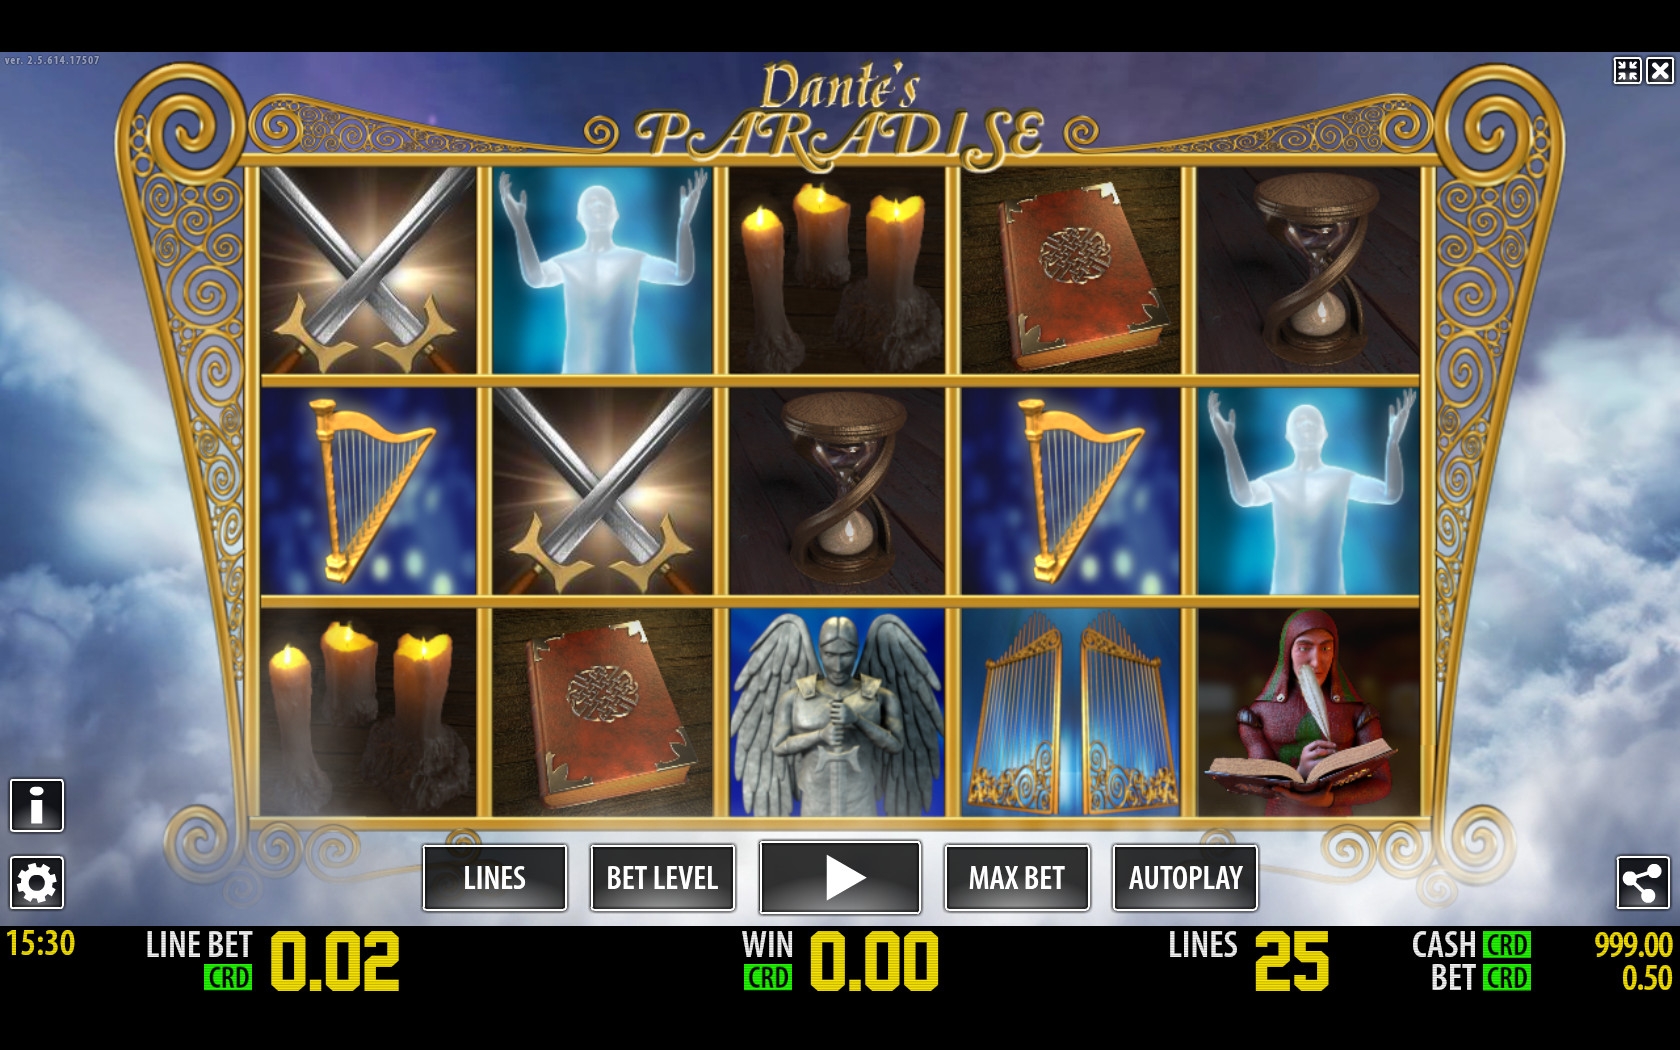 Dante’s Paradise (Dante’s Paradise) from category Slots